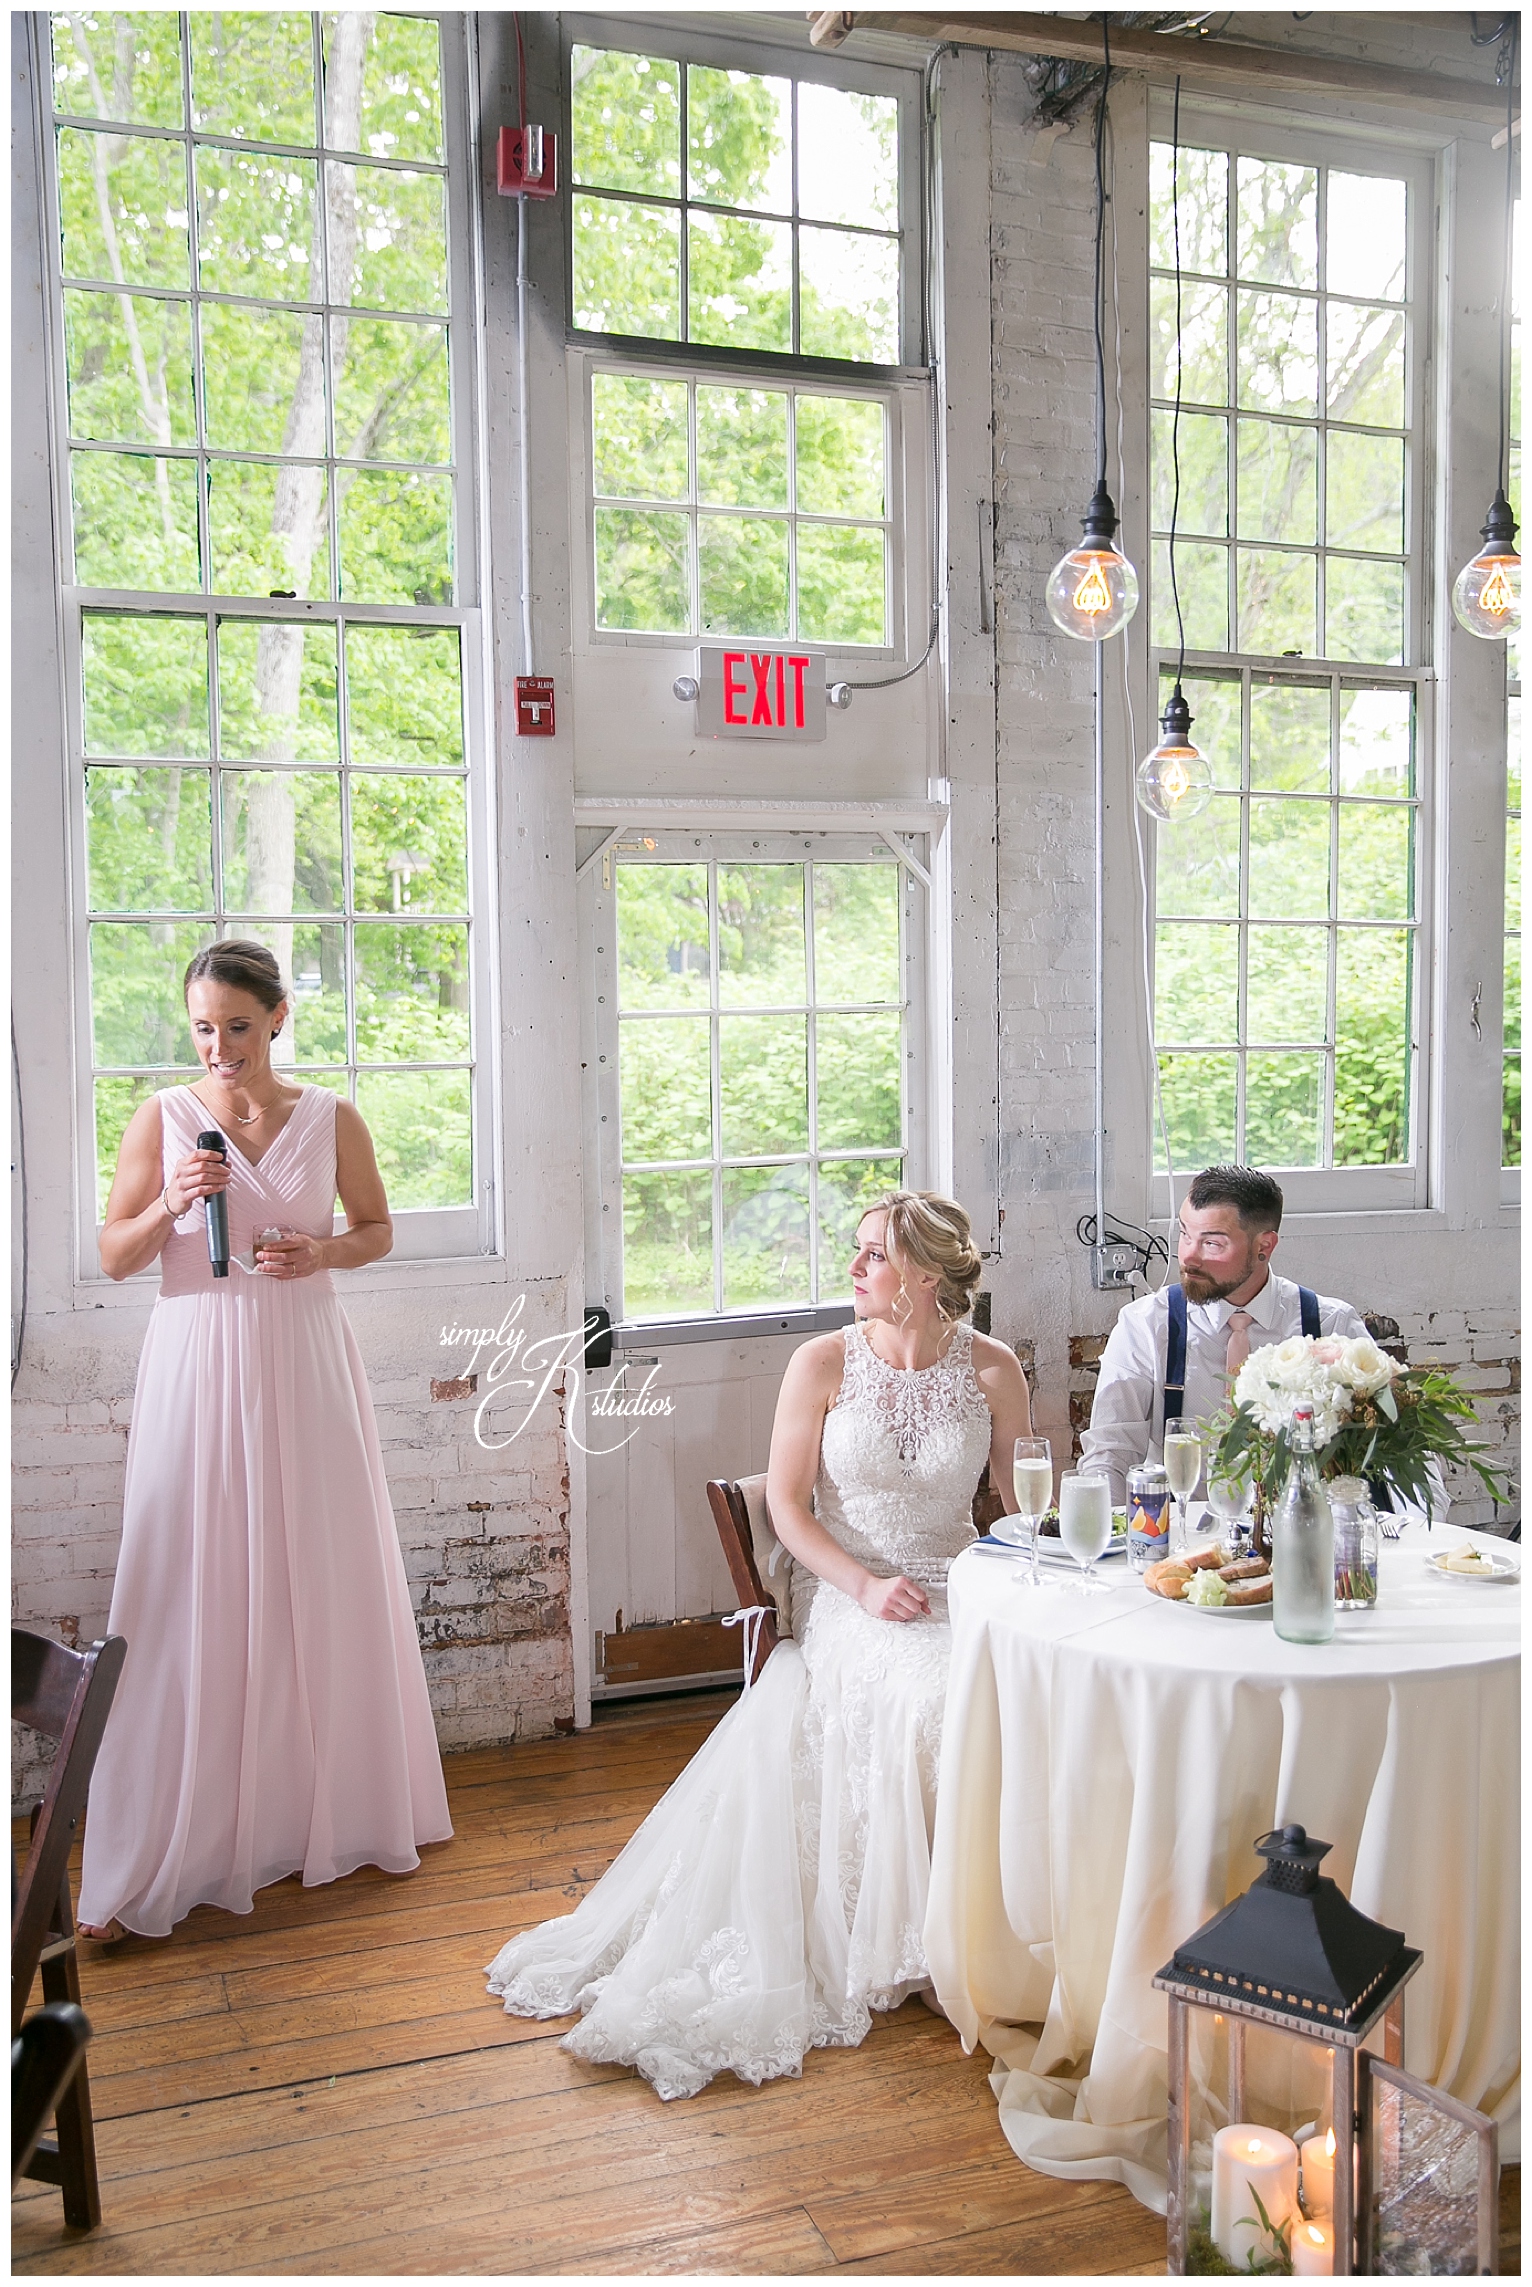 Wedding Photographers with a light and airy style.jpg